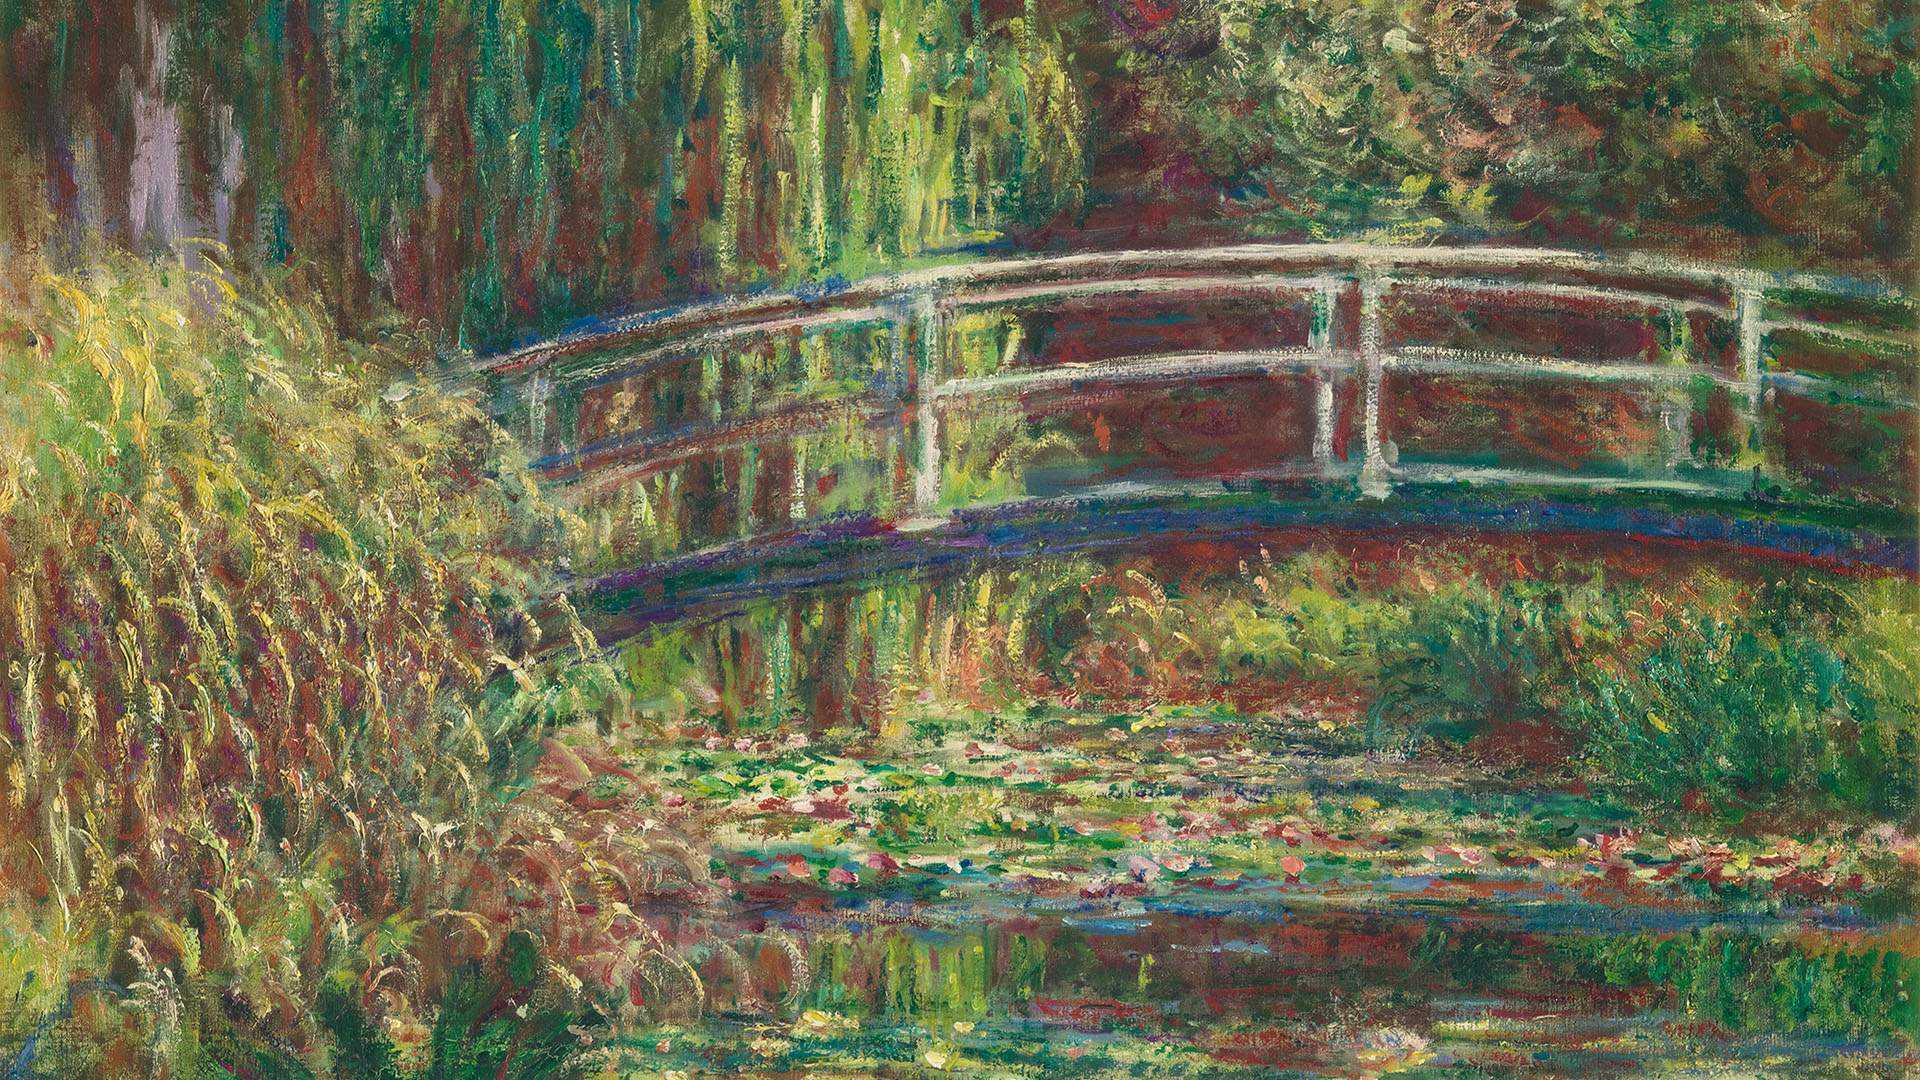 A Major French Impressionist Exhibition is Coming to Australia